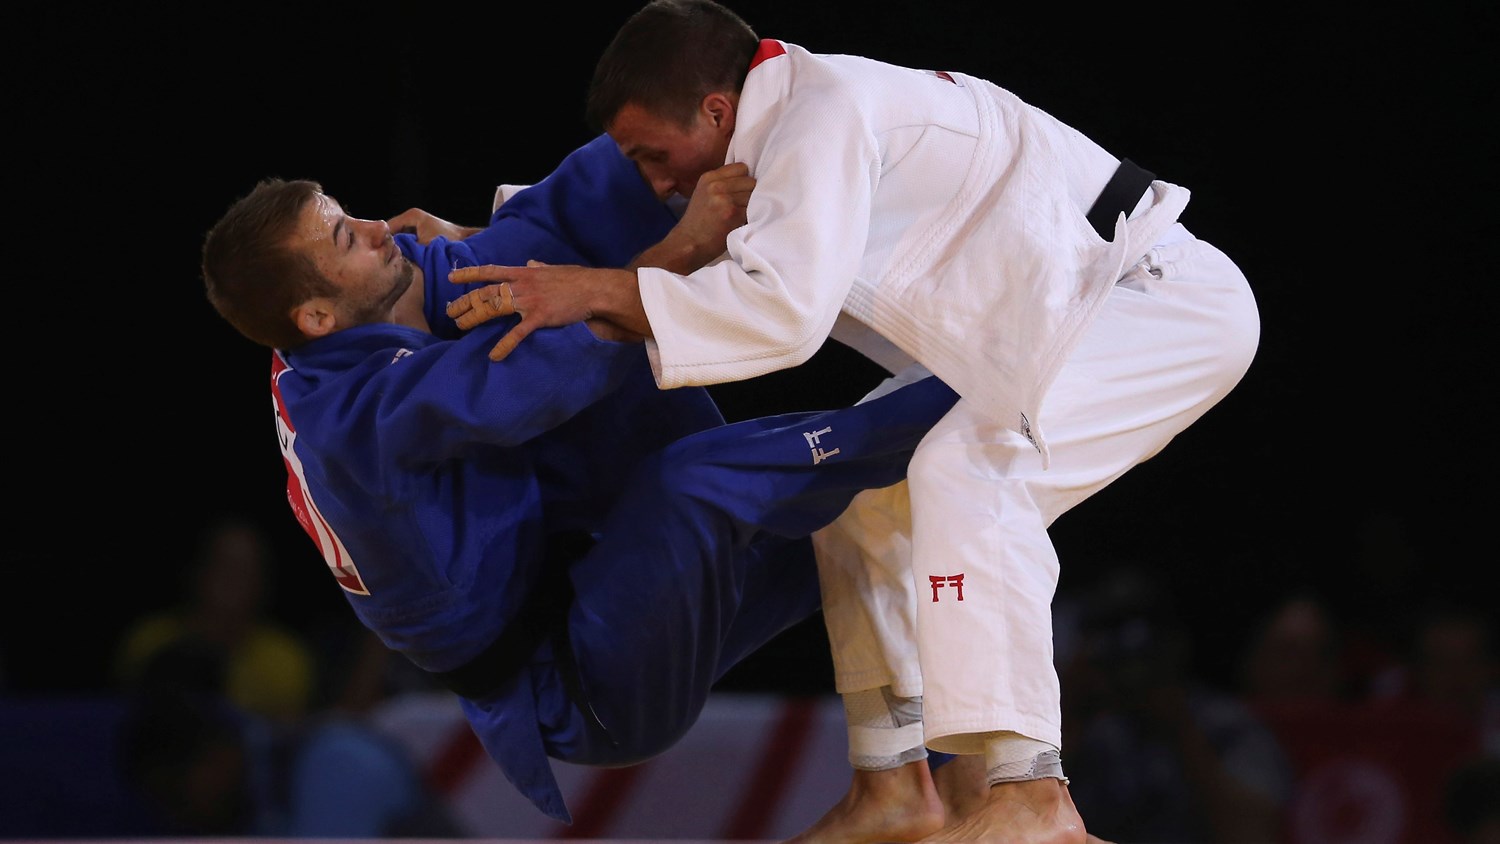 European Games in Baku could be start of new era for blind judo